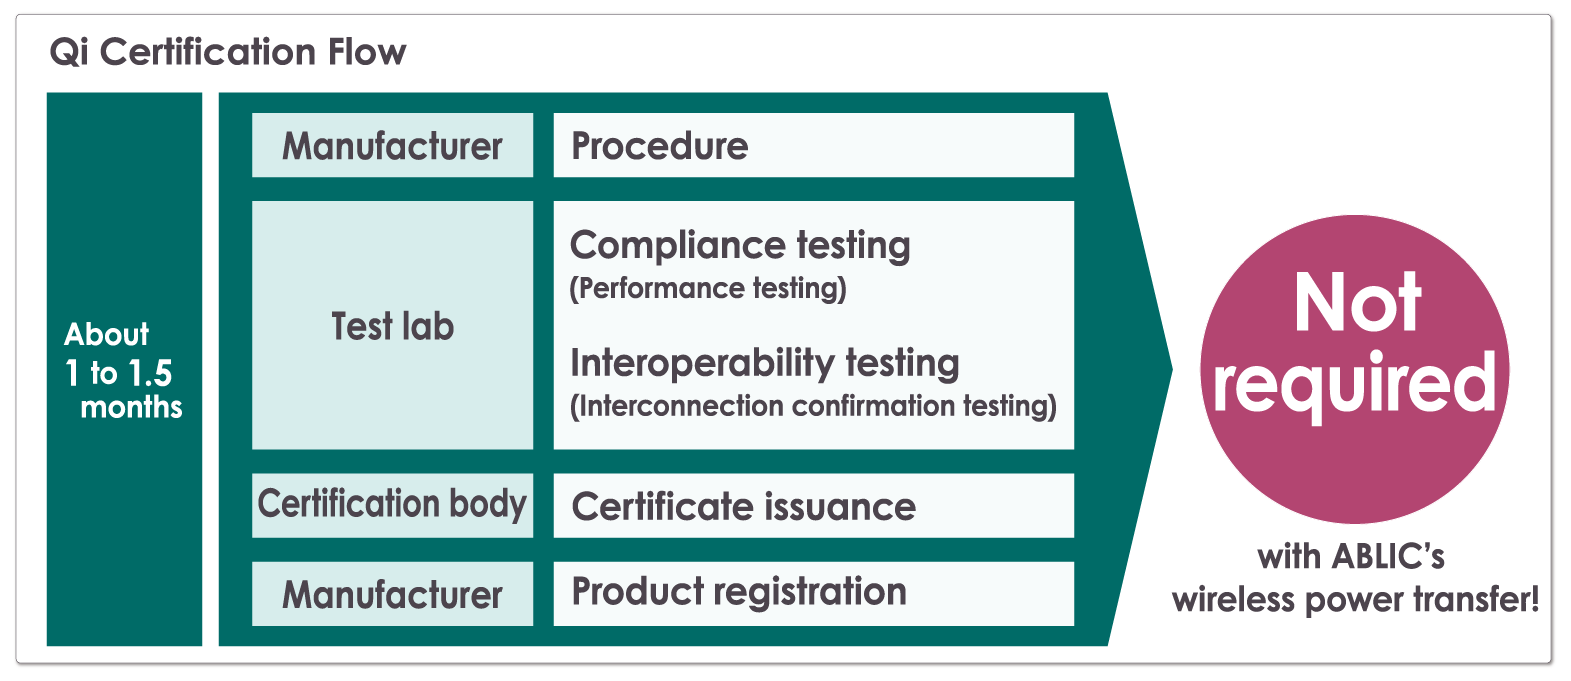  No need for Qi standard compliance